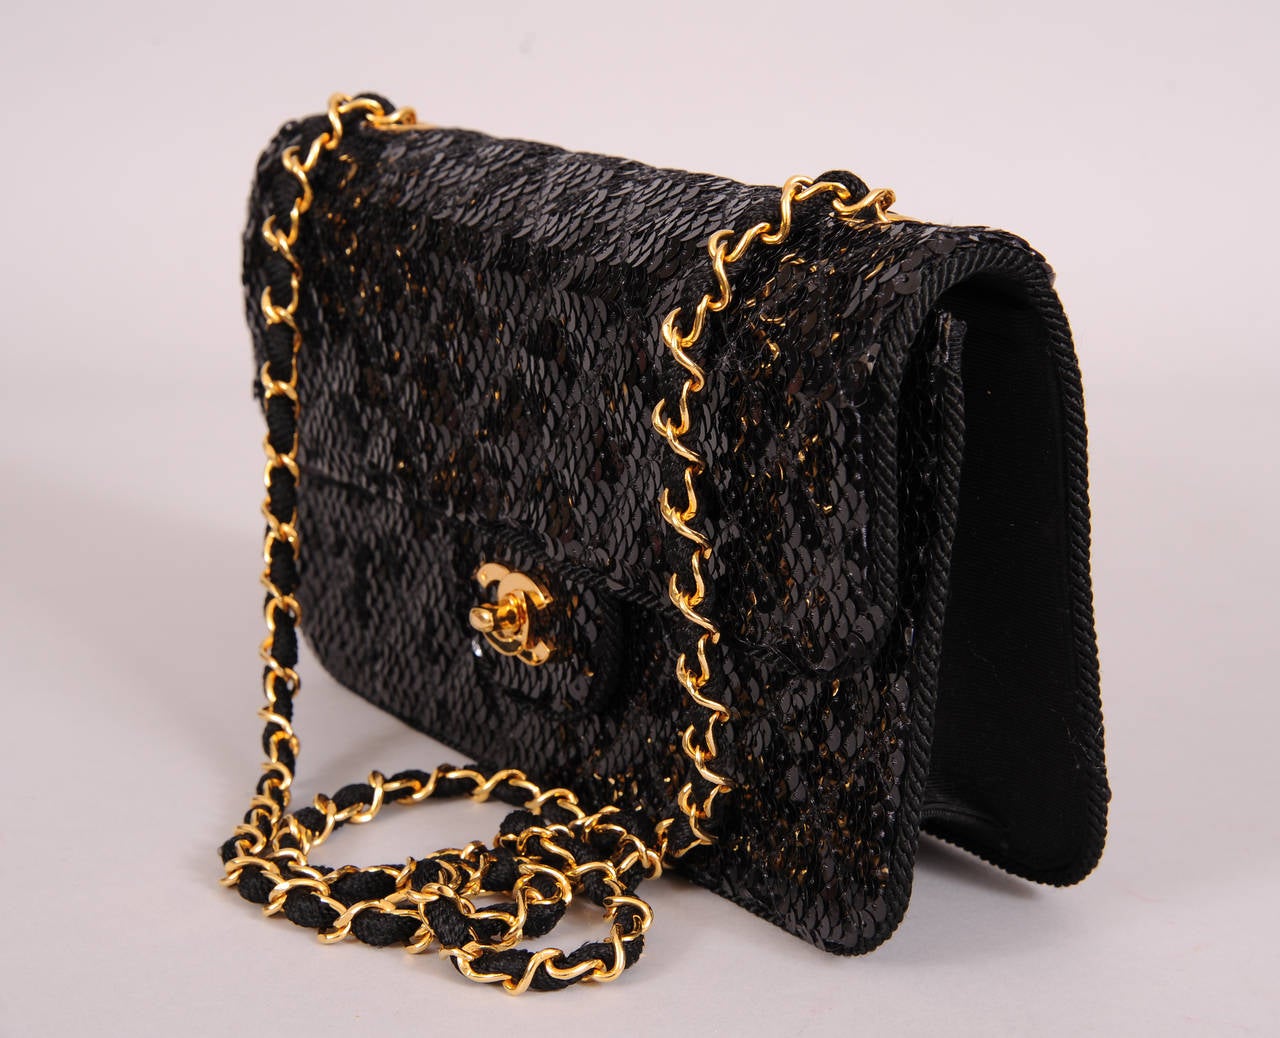 Chanel Sparkling Black Sequin Quilted Bag with Chain Strap, Never Used For Sale at 1stdibs